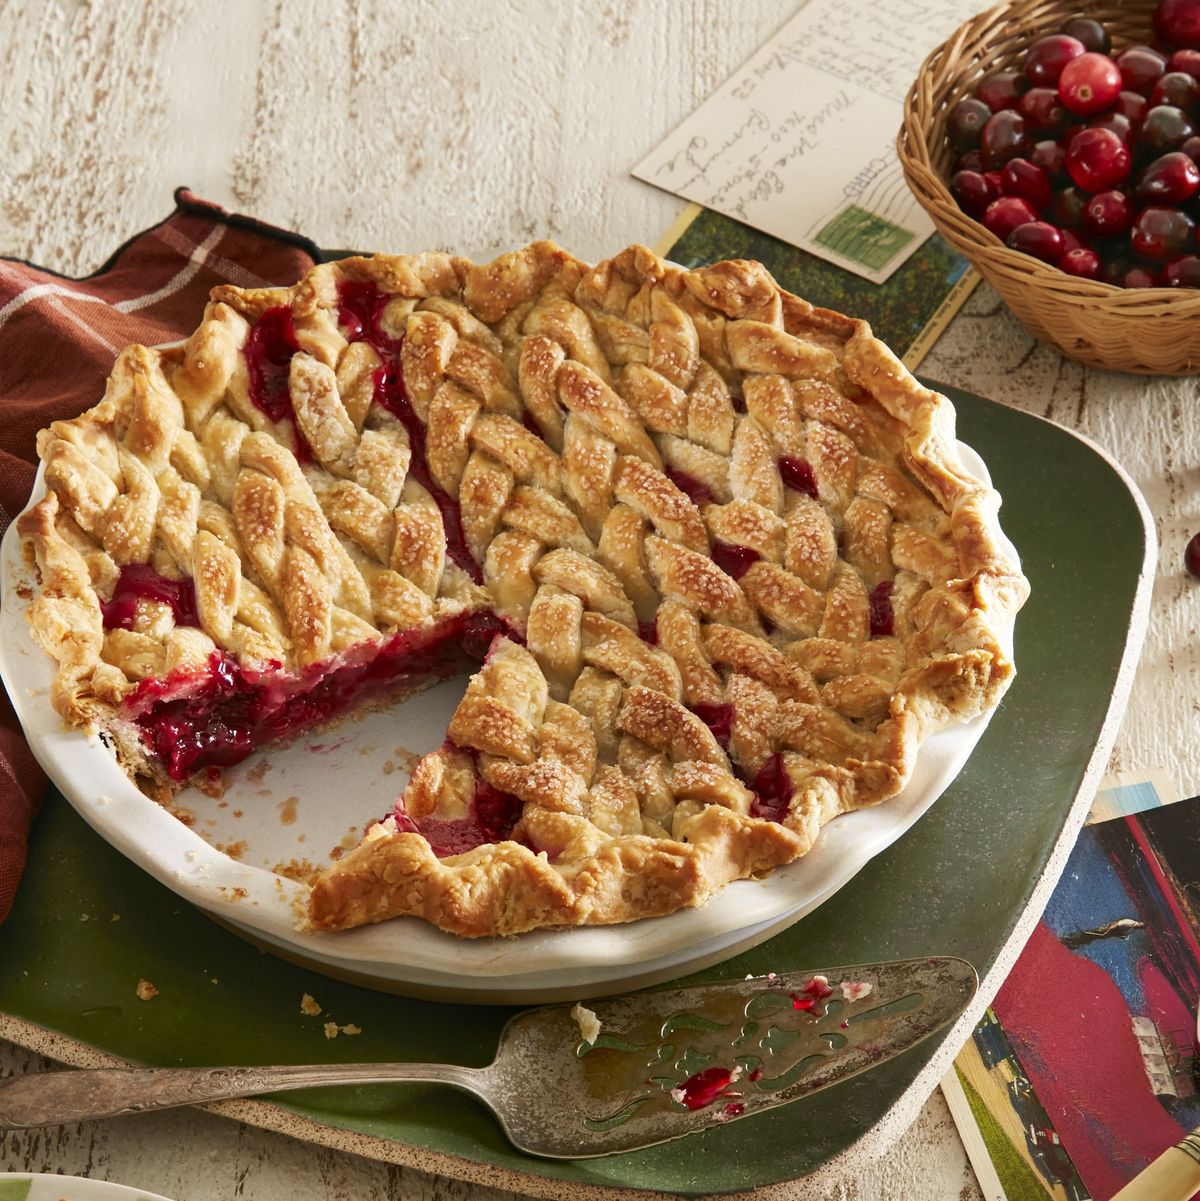 braided cranberry orange pie in a white pie dish with a pie server next to it and a green plate with a slice on it